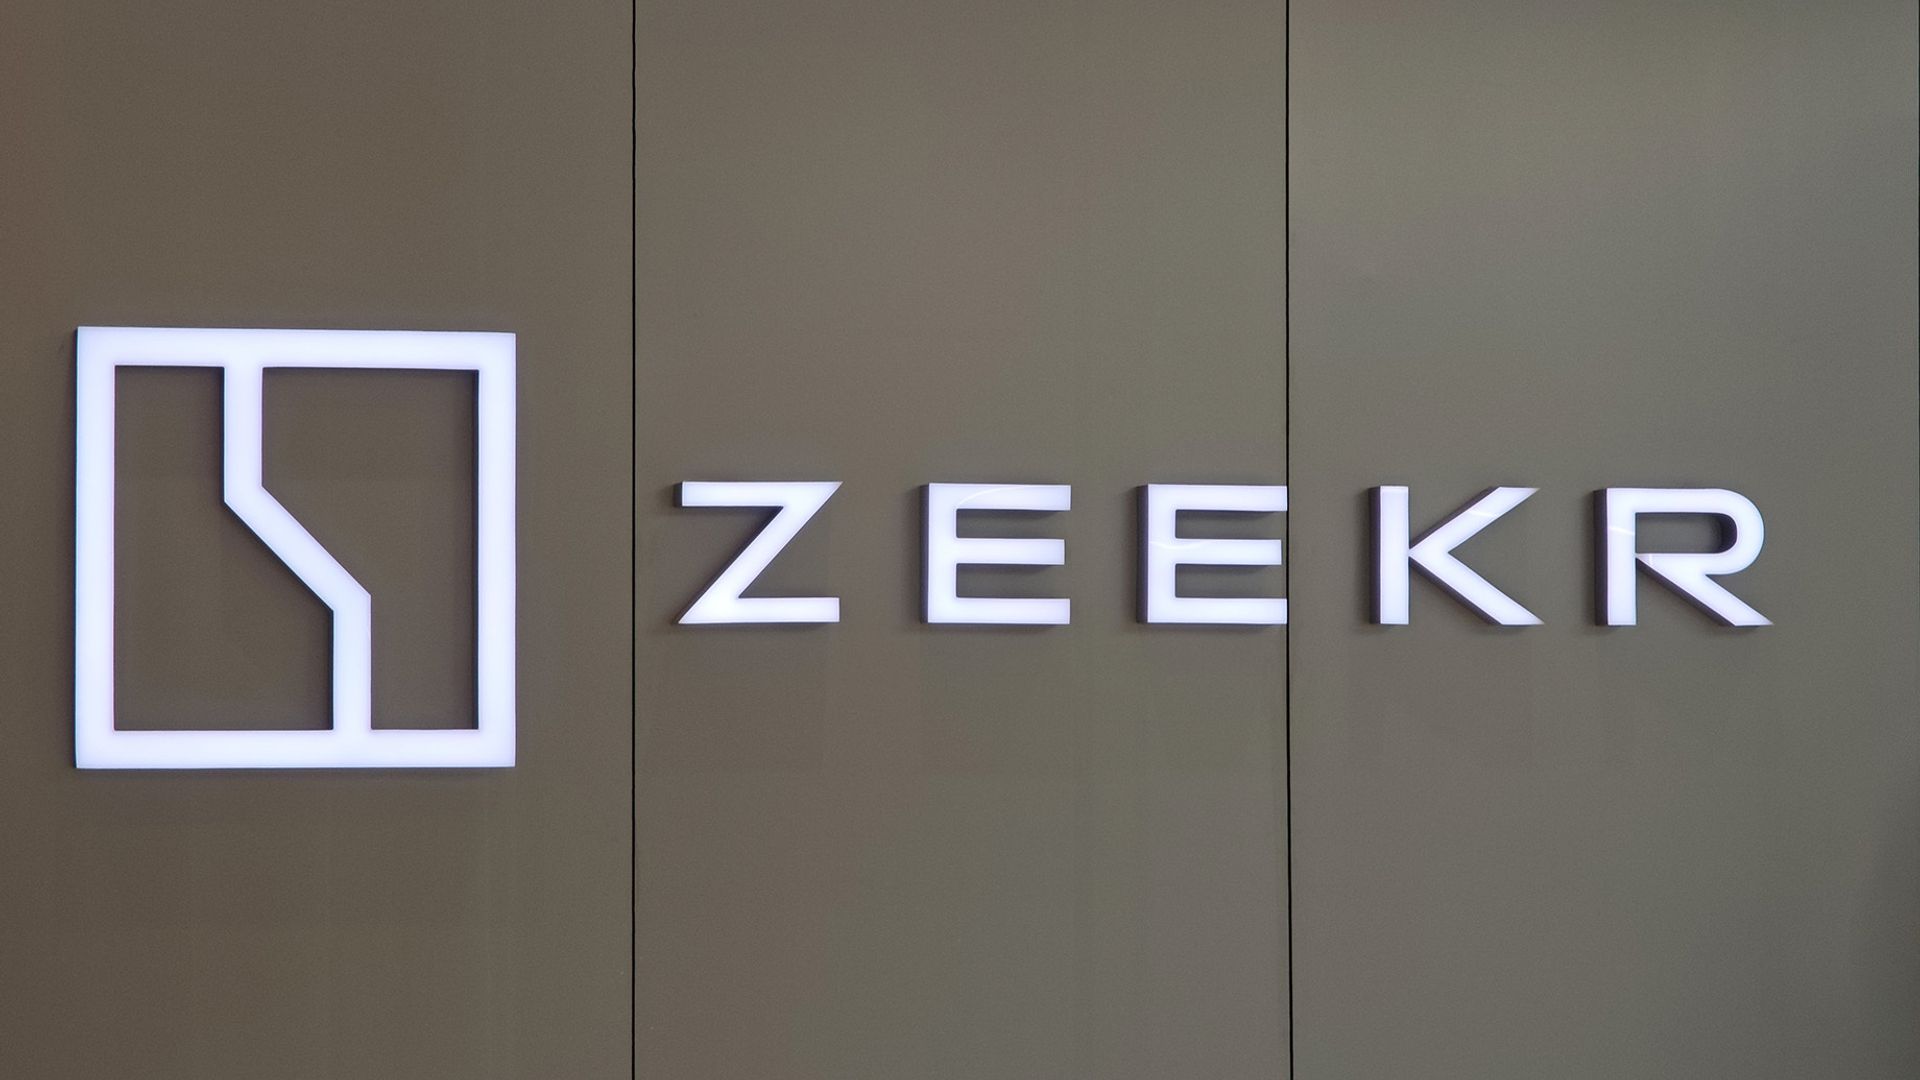 Chinese EV-maker Zeekr wants to sell their cars to Americans, but increased tariffs from the White House aims to hinder those plans.